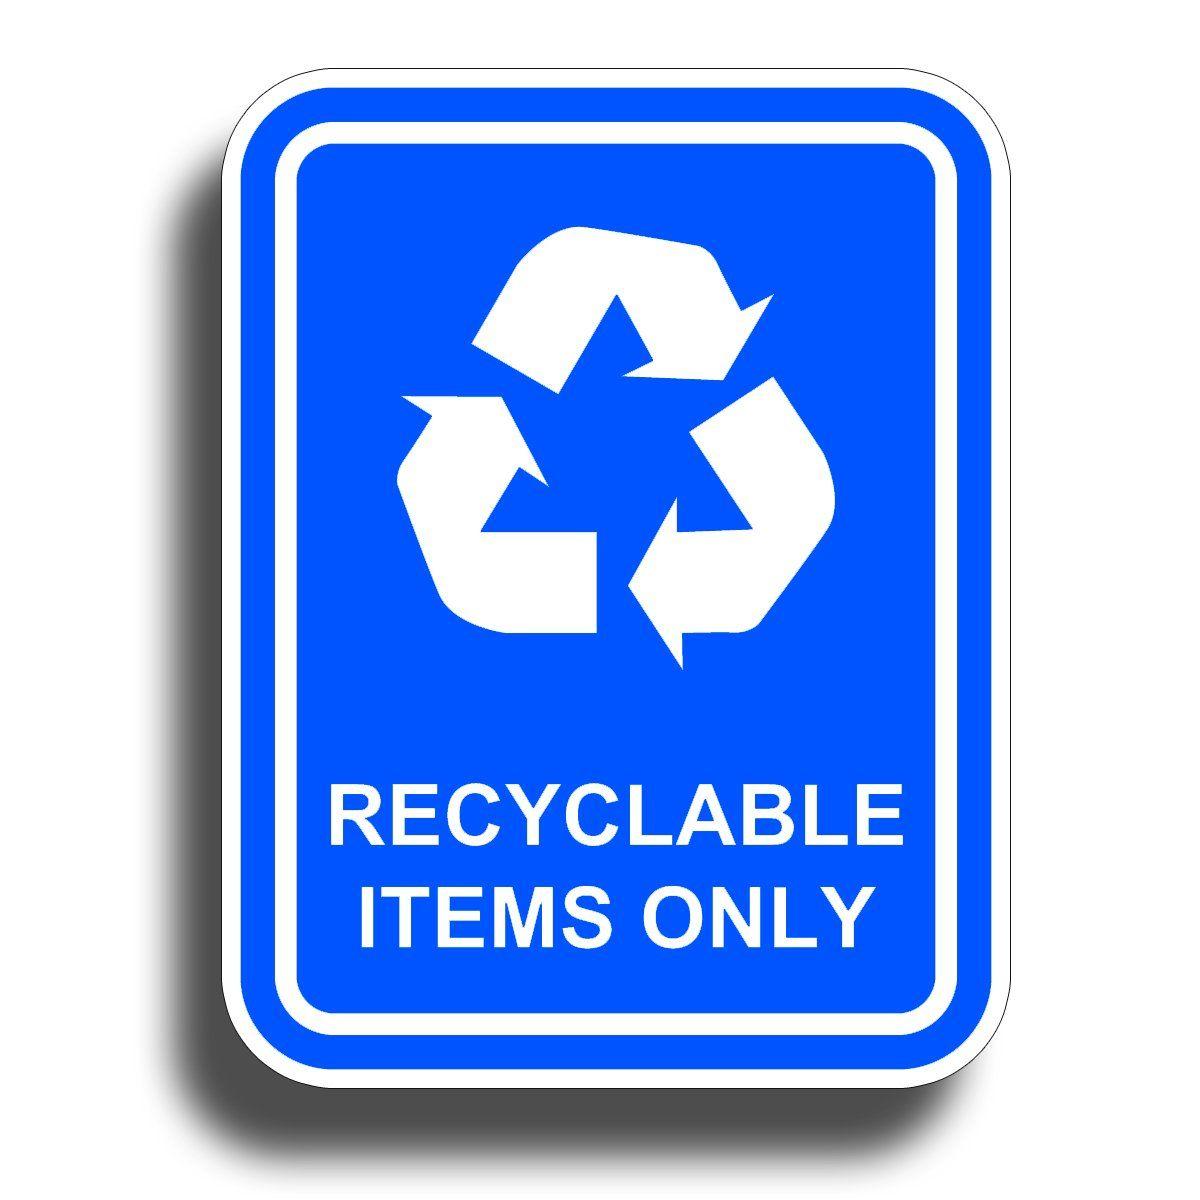 Blue Recycle Logo - Amazon.com : Recycling Items Only Sticker Vinyl Die Cut Recycling ...